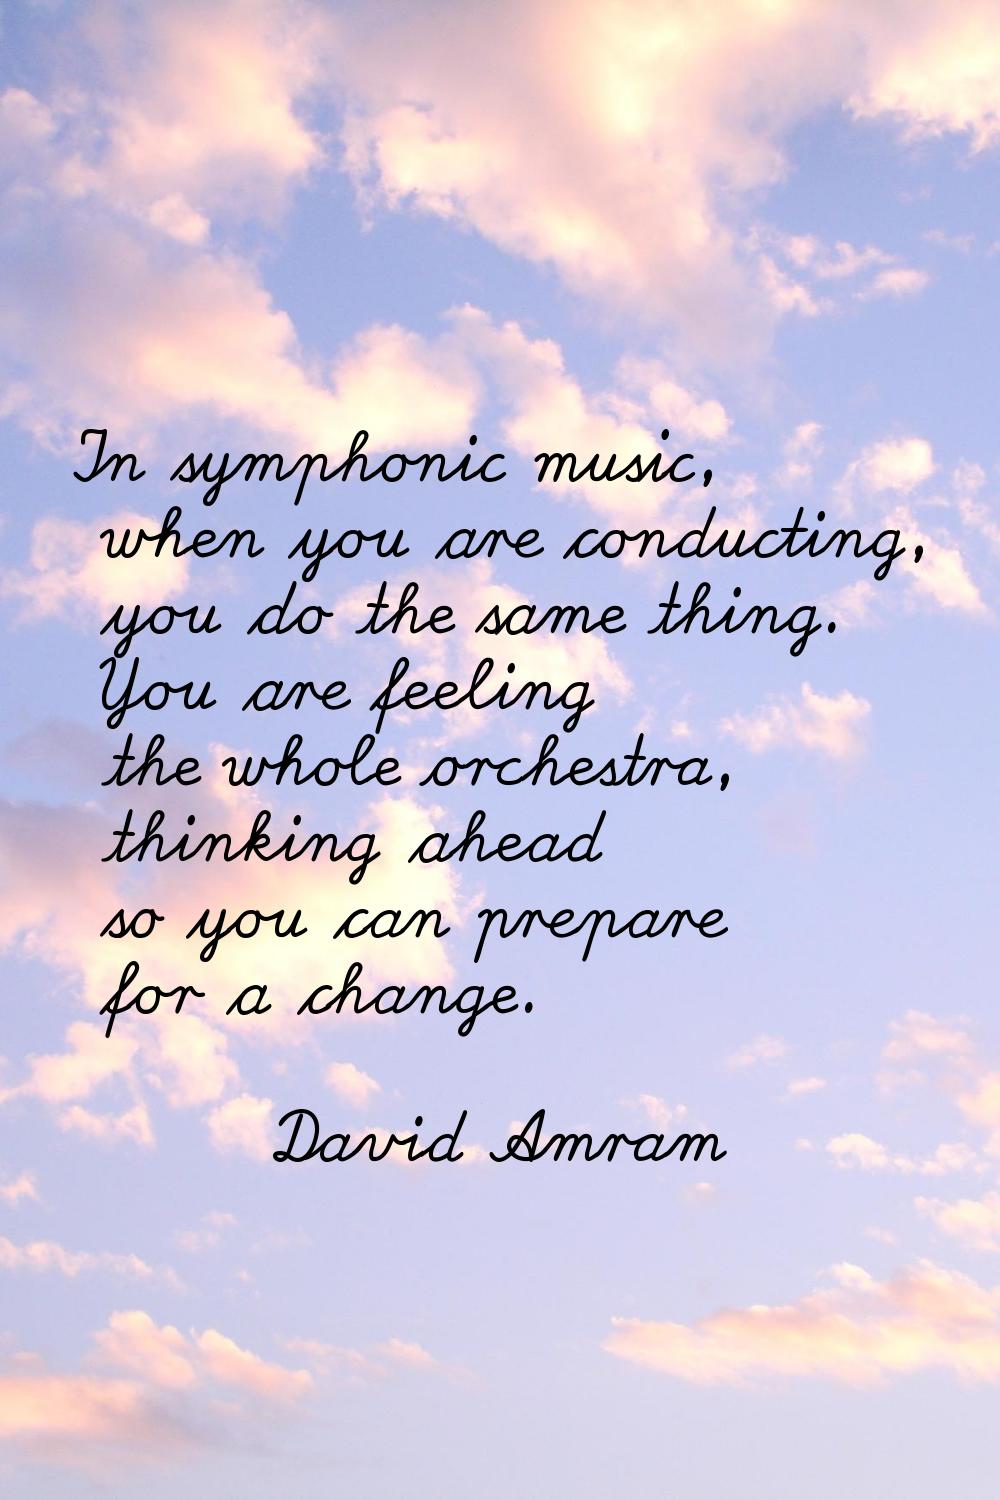 In symphonic music, when you are conducting, you do the same thing. You are feeling the whole orche